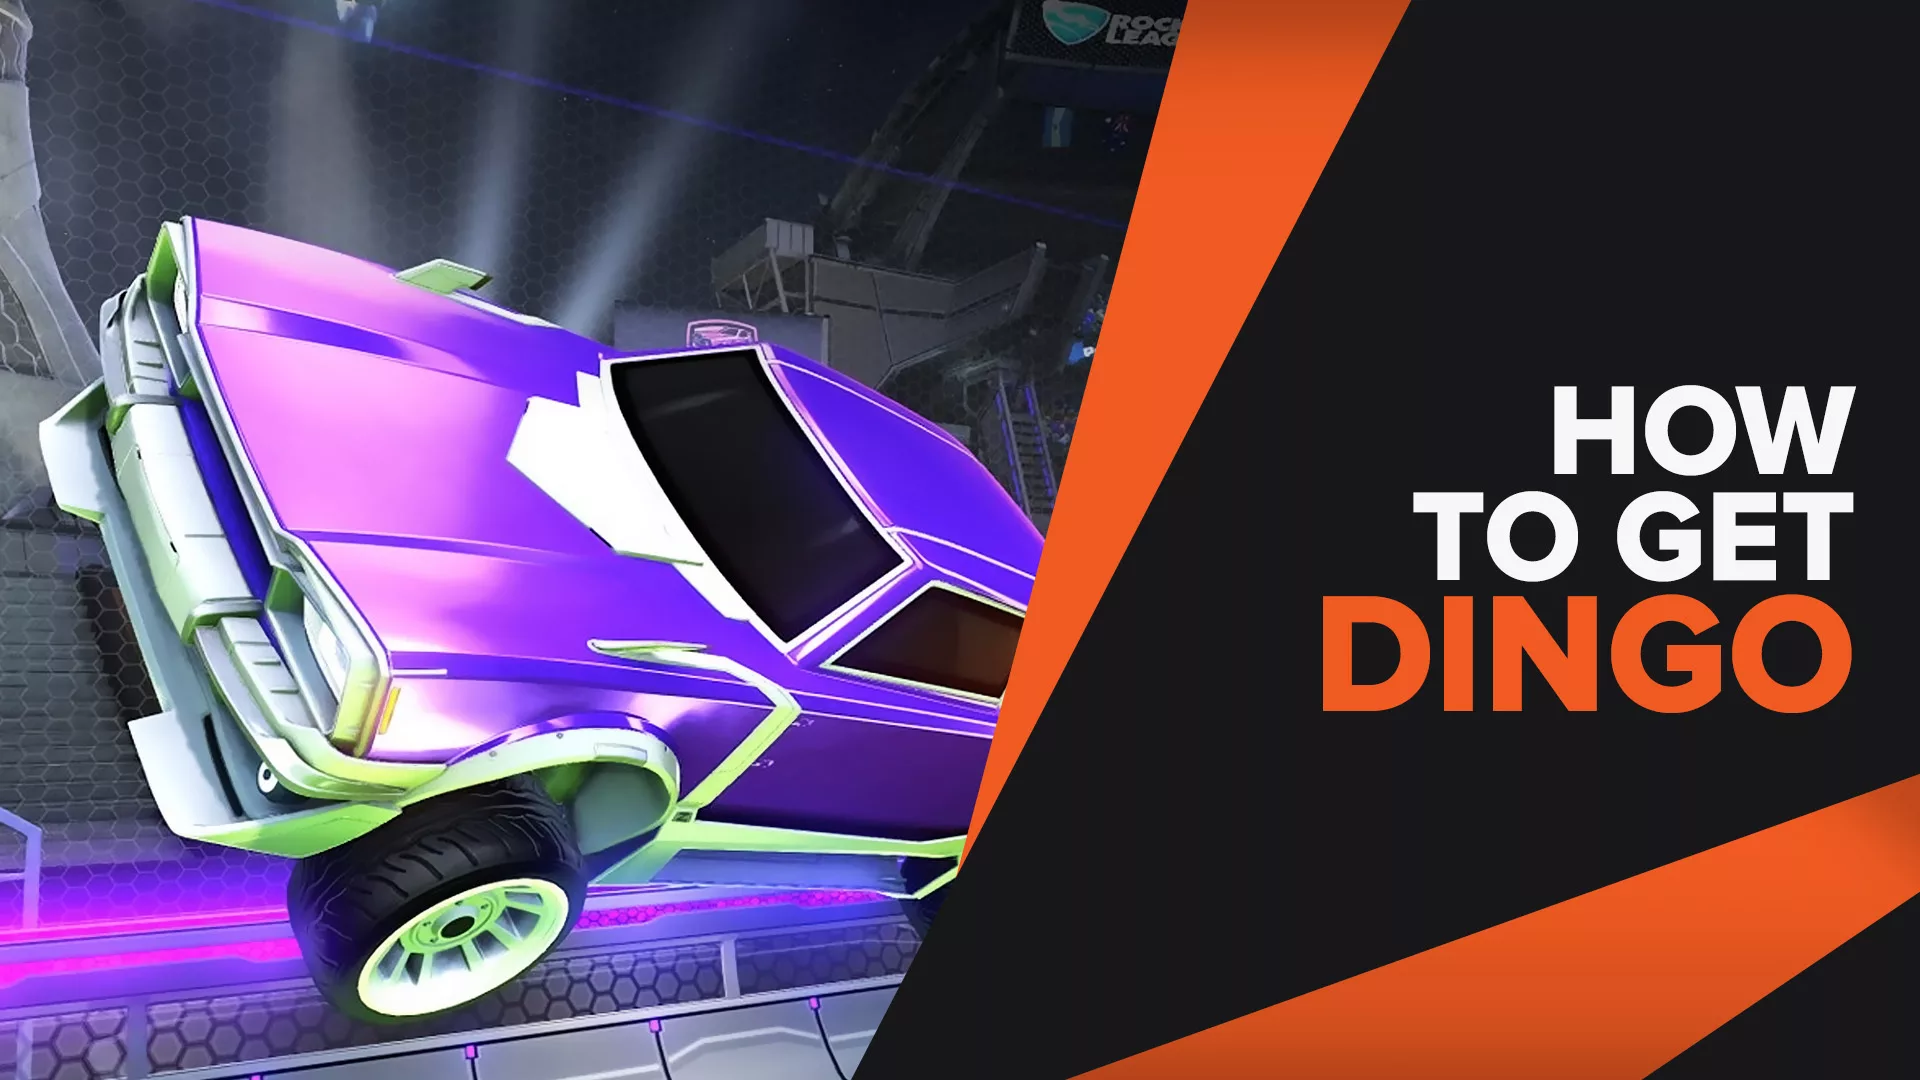 Learn how to get the Dingo car in Rocket League!